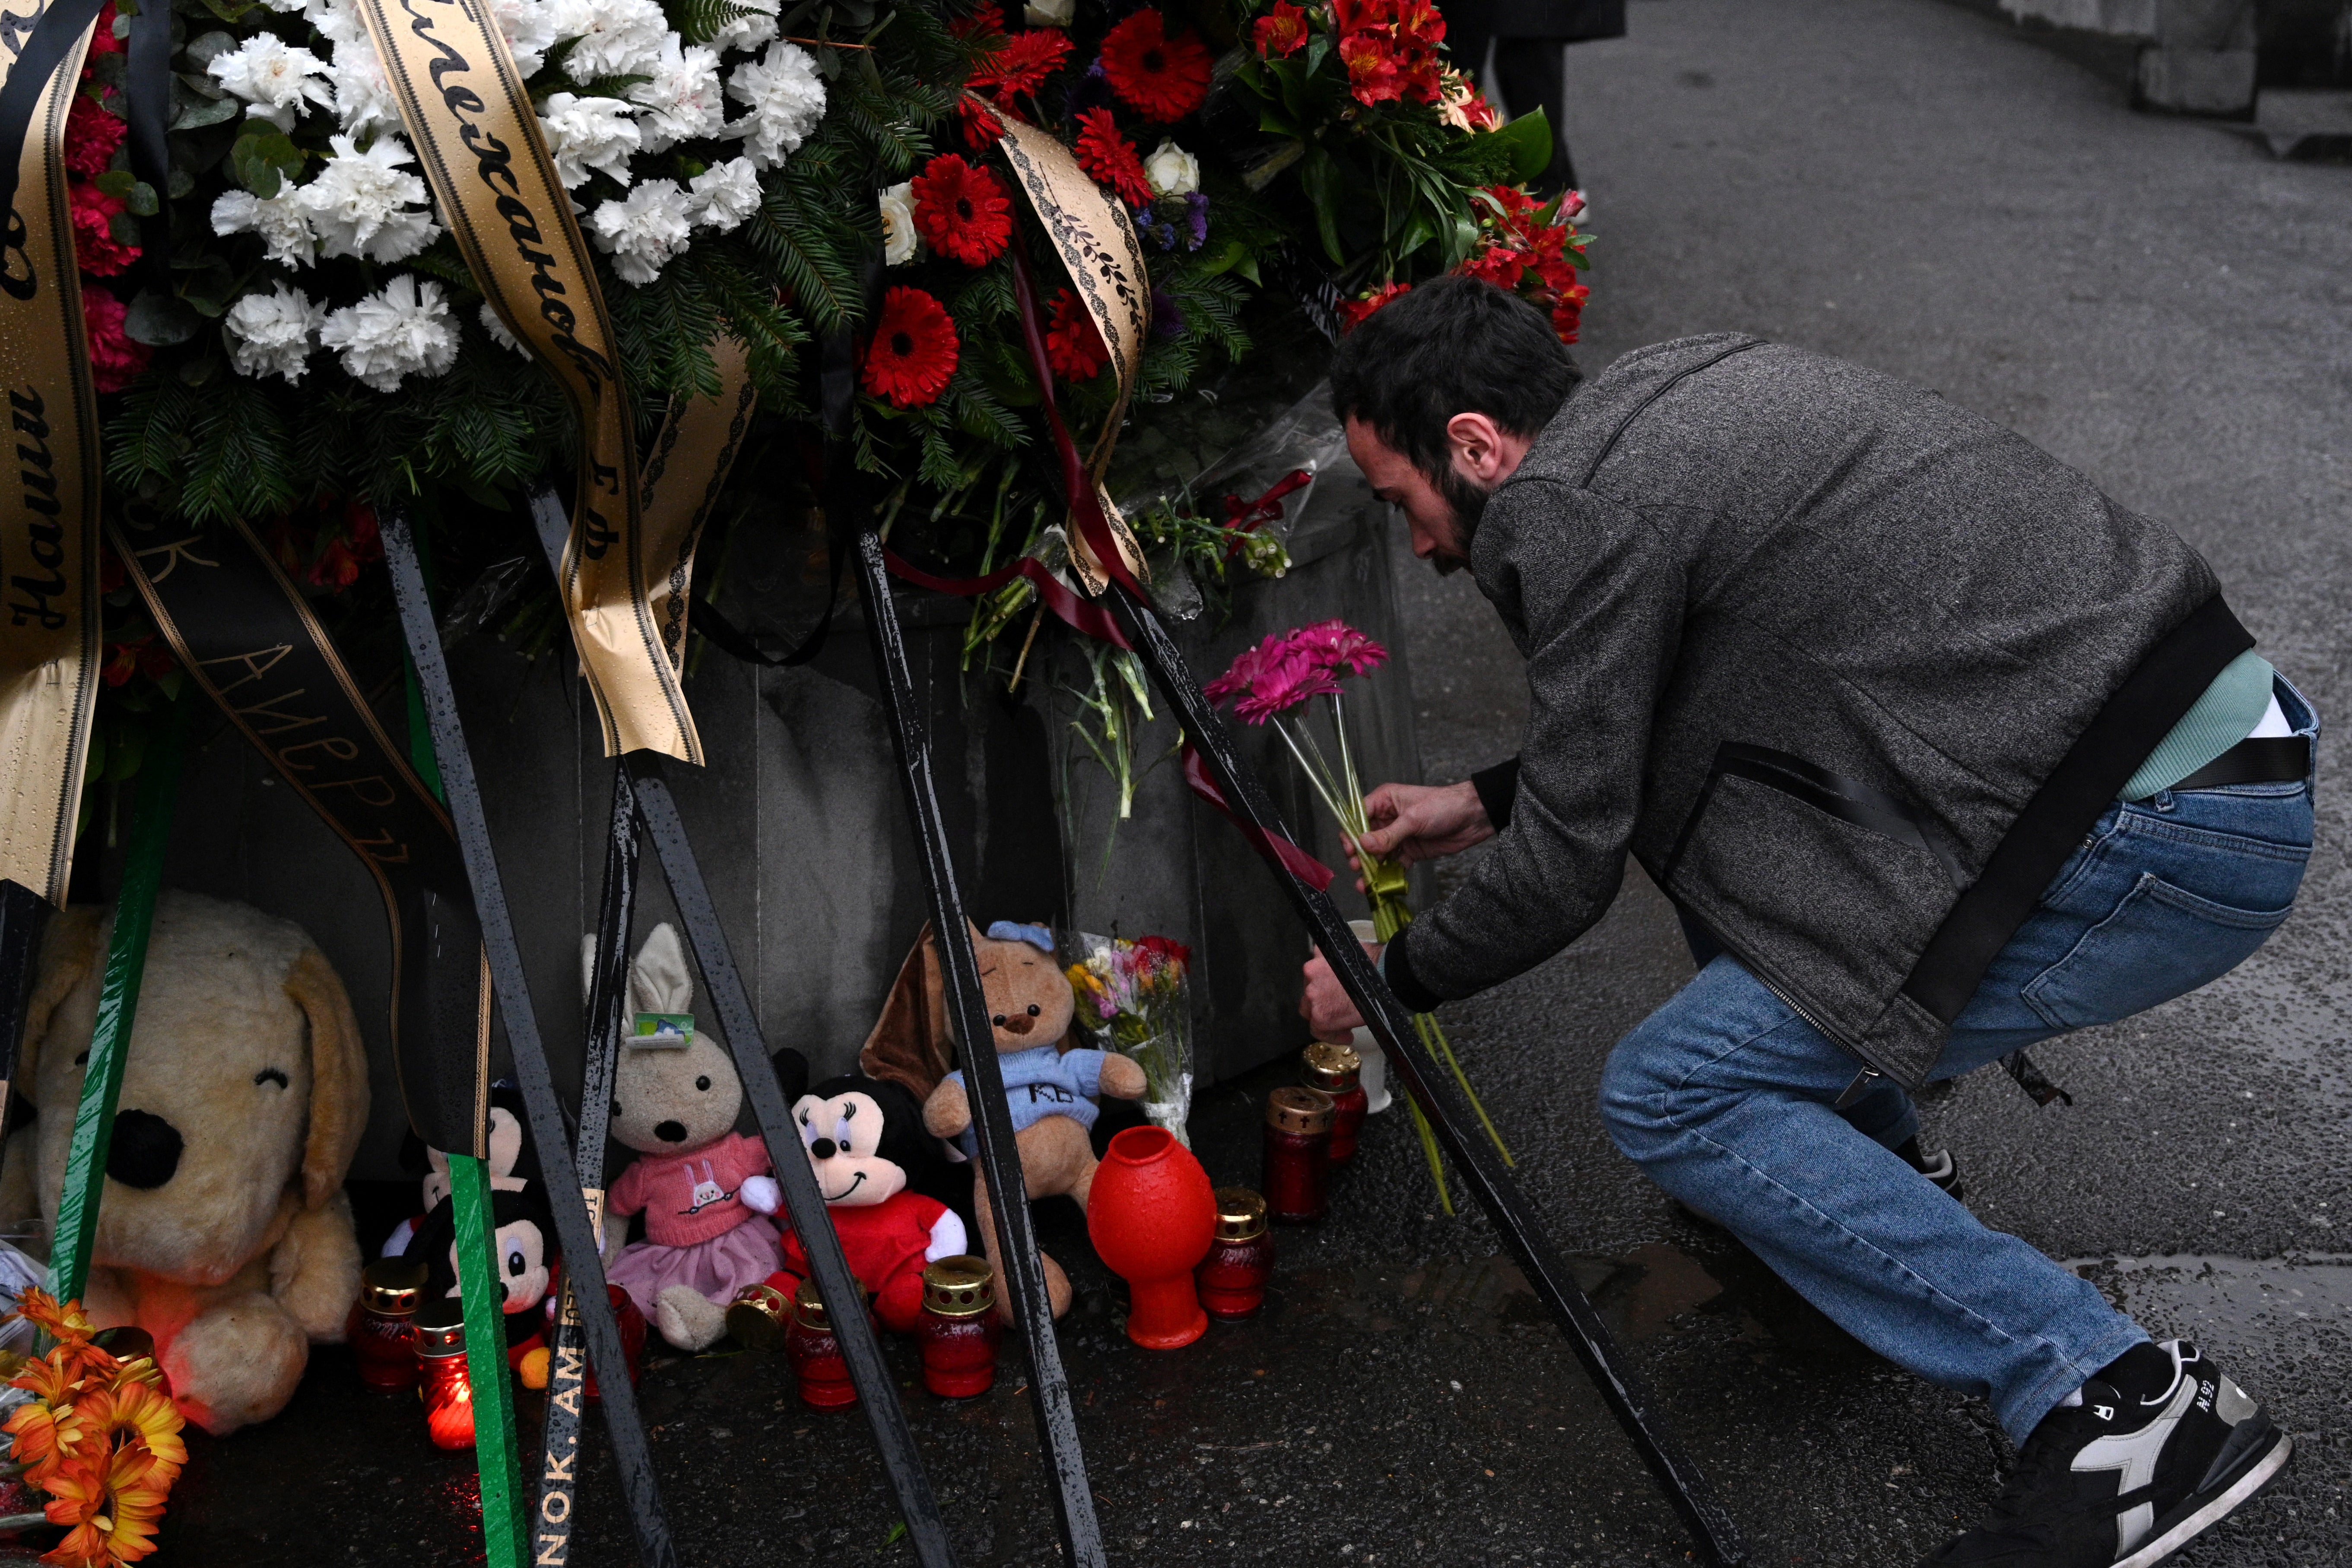 Russia announced a national day of mourning on Sunday